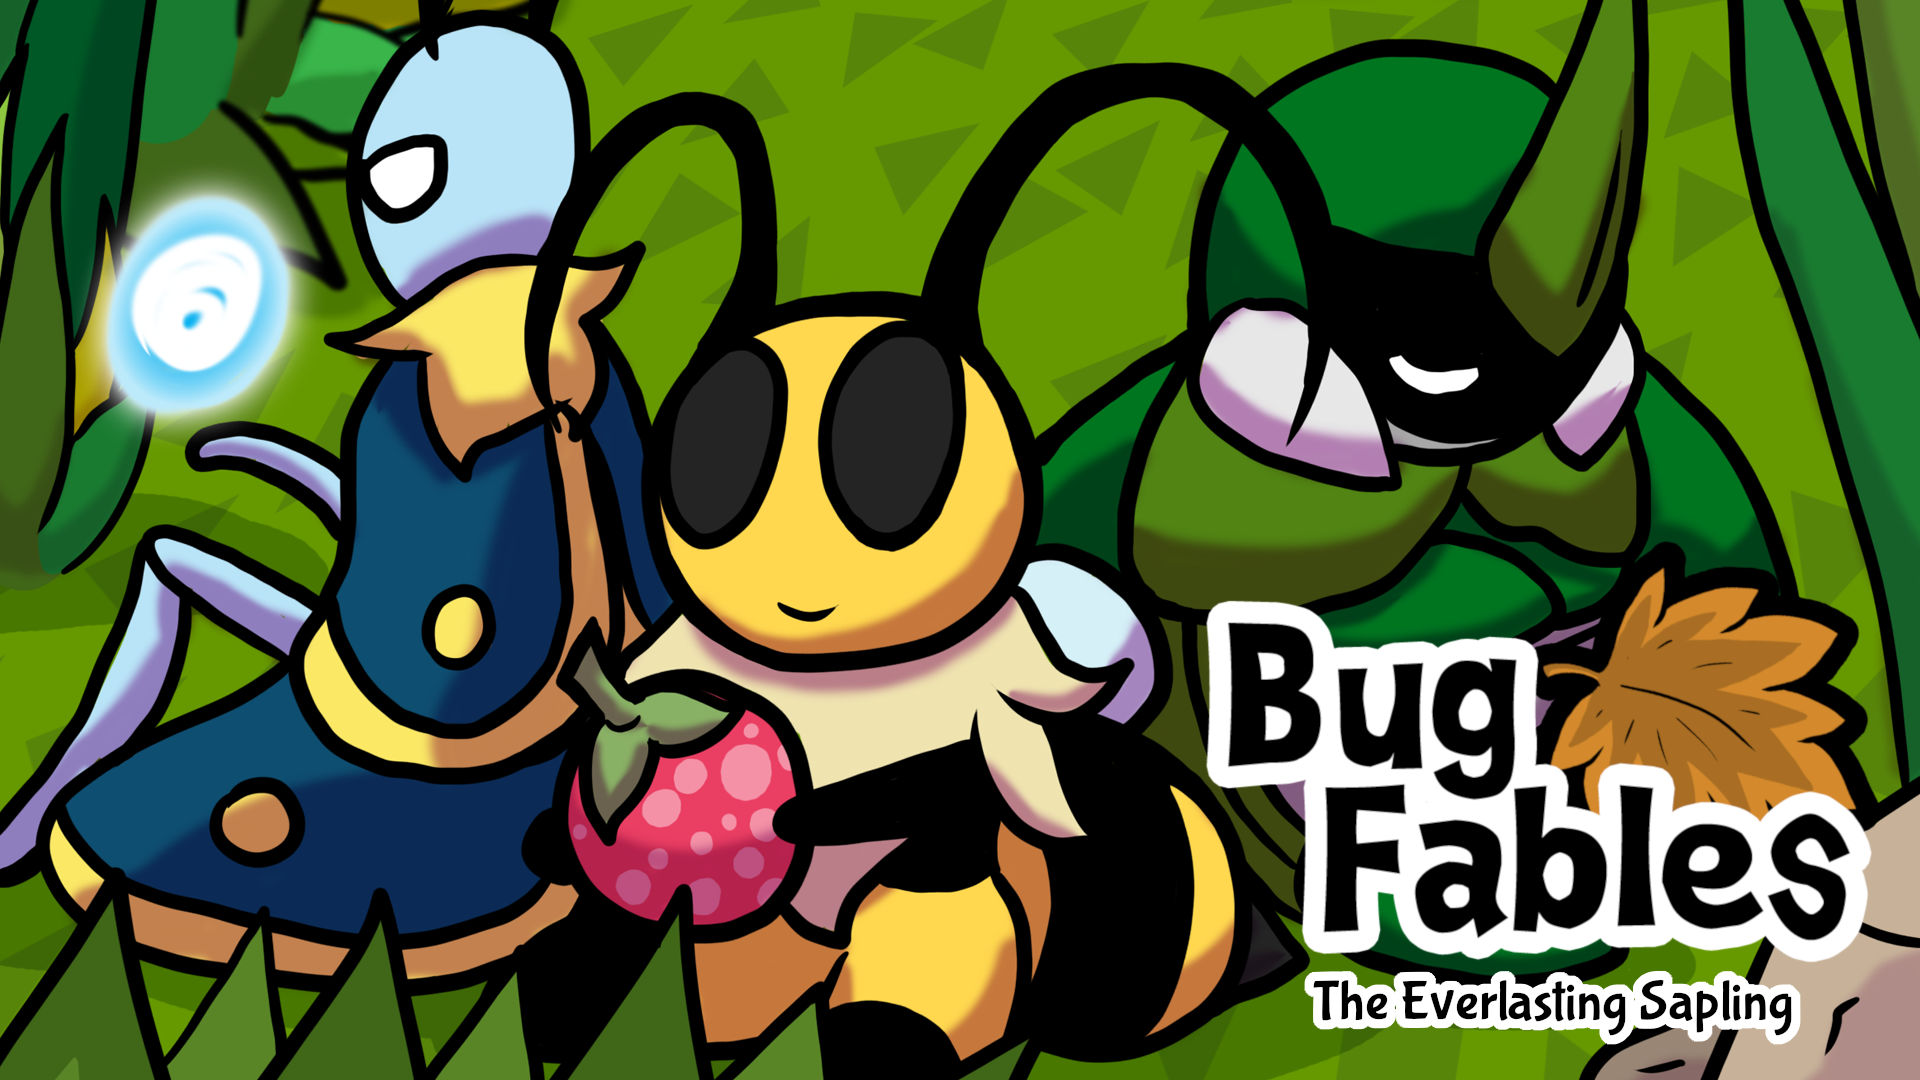 Review: Bug Fables is a must.